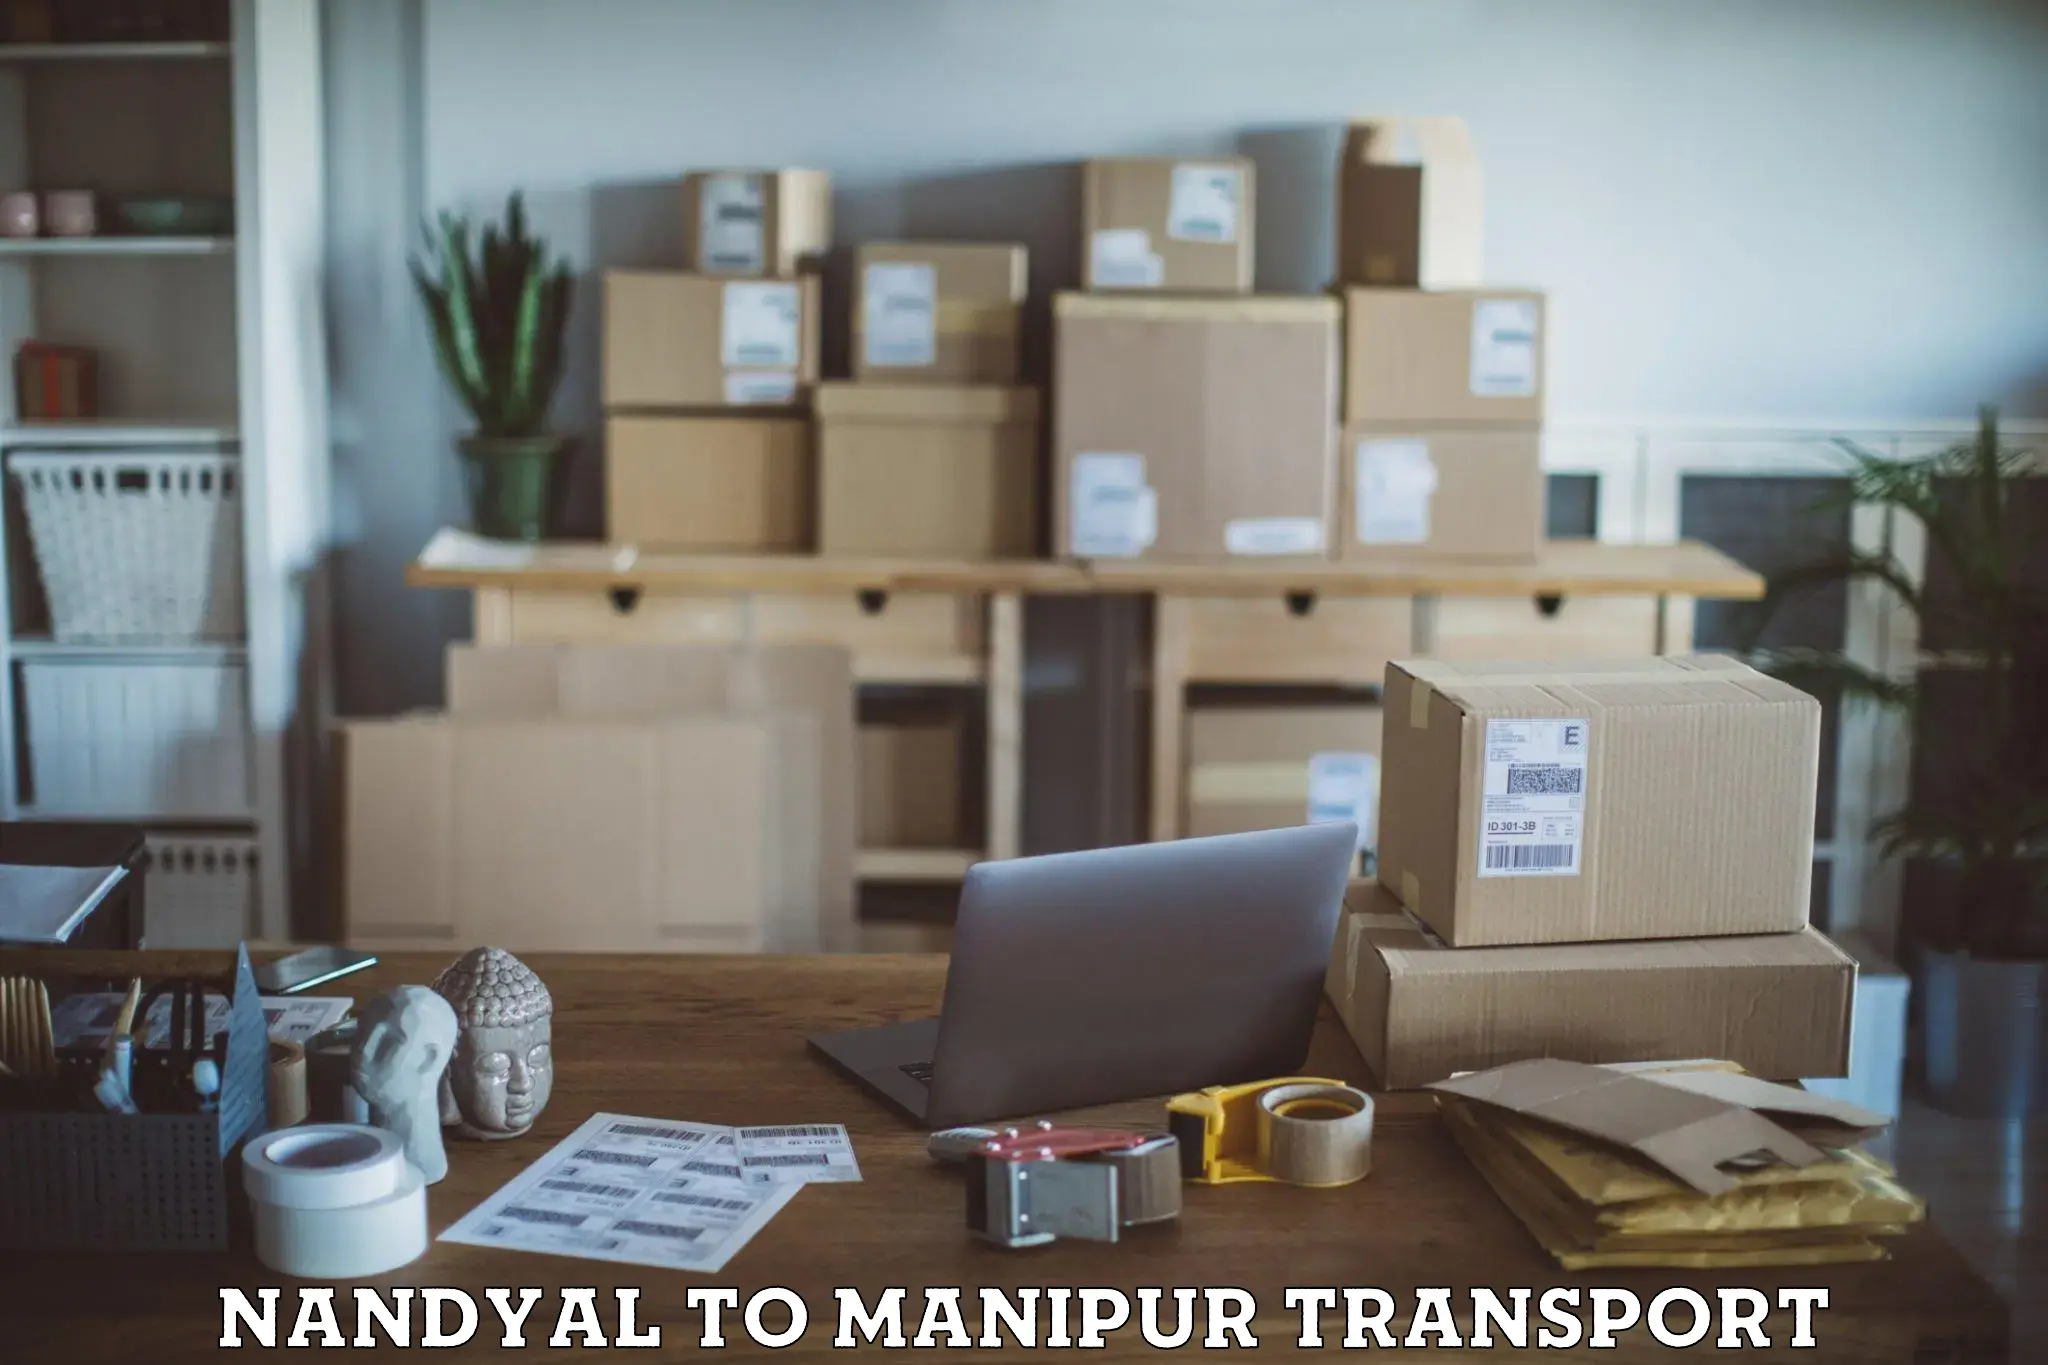 Transport shared services Nandyal to Manipur